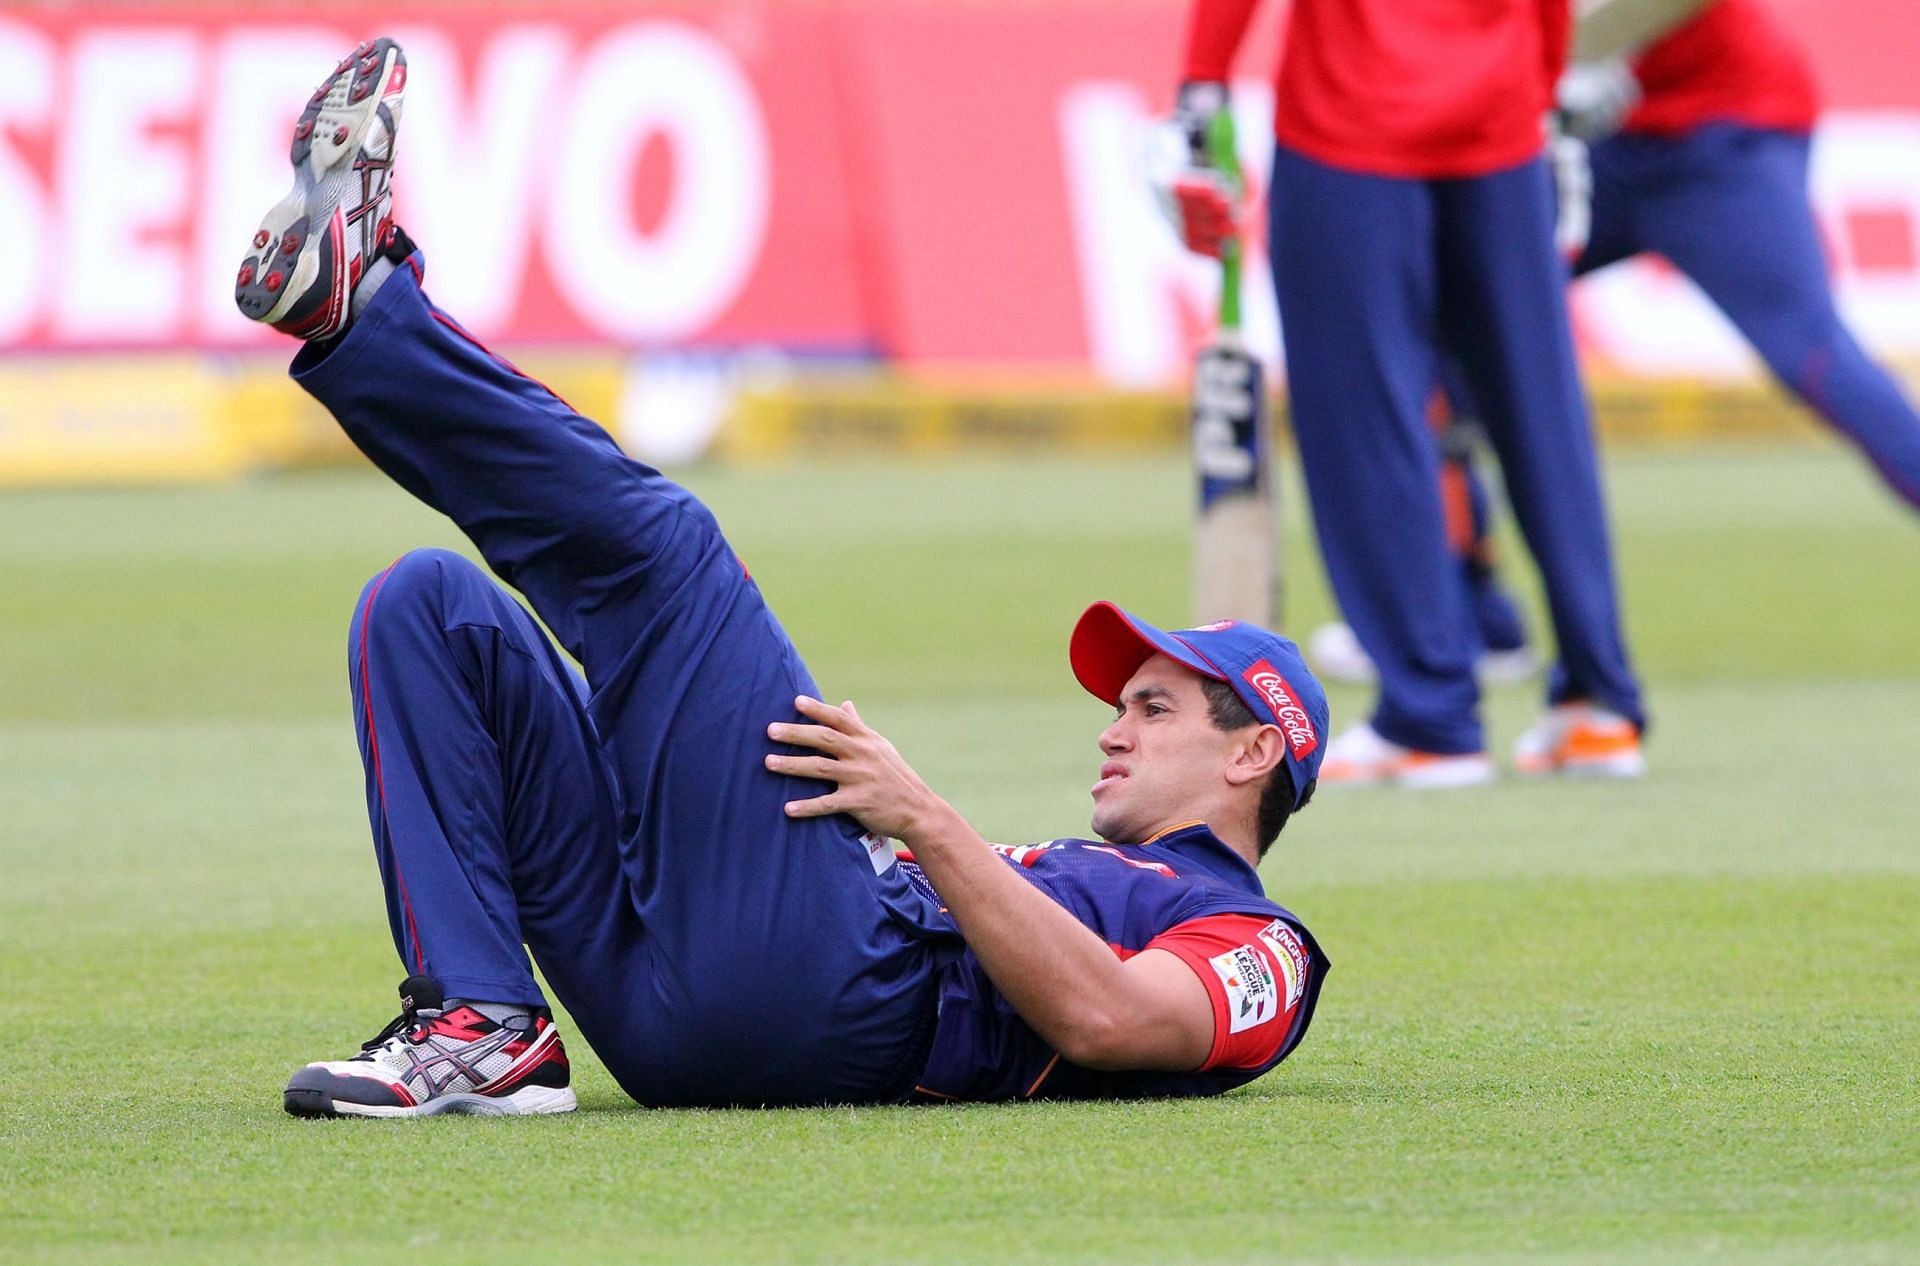 Ross Taylor turned out for Delhi Daredevils in 2012, before returning to represent them a couple of years later.